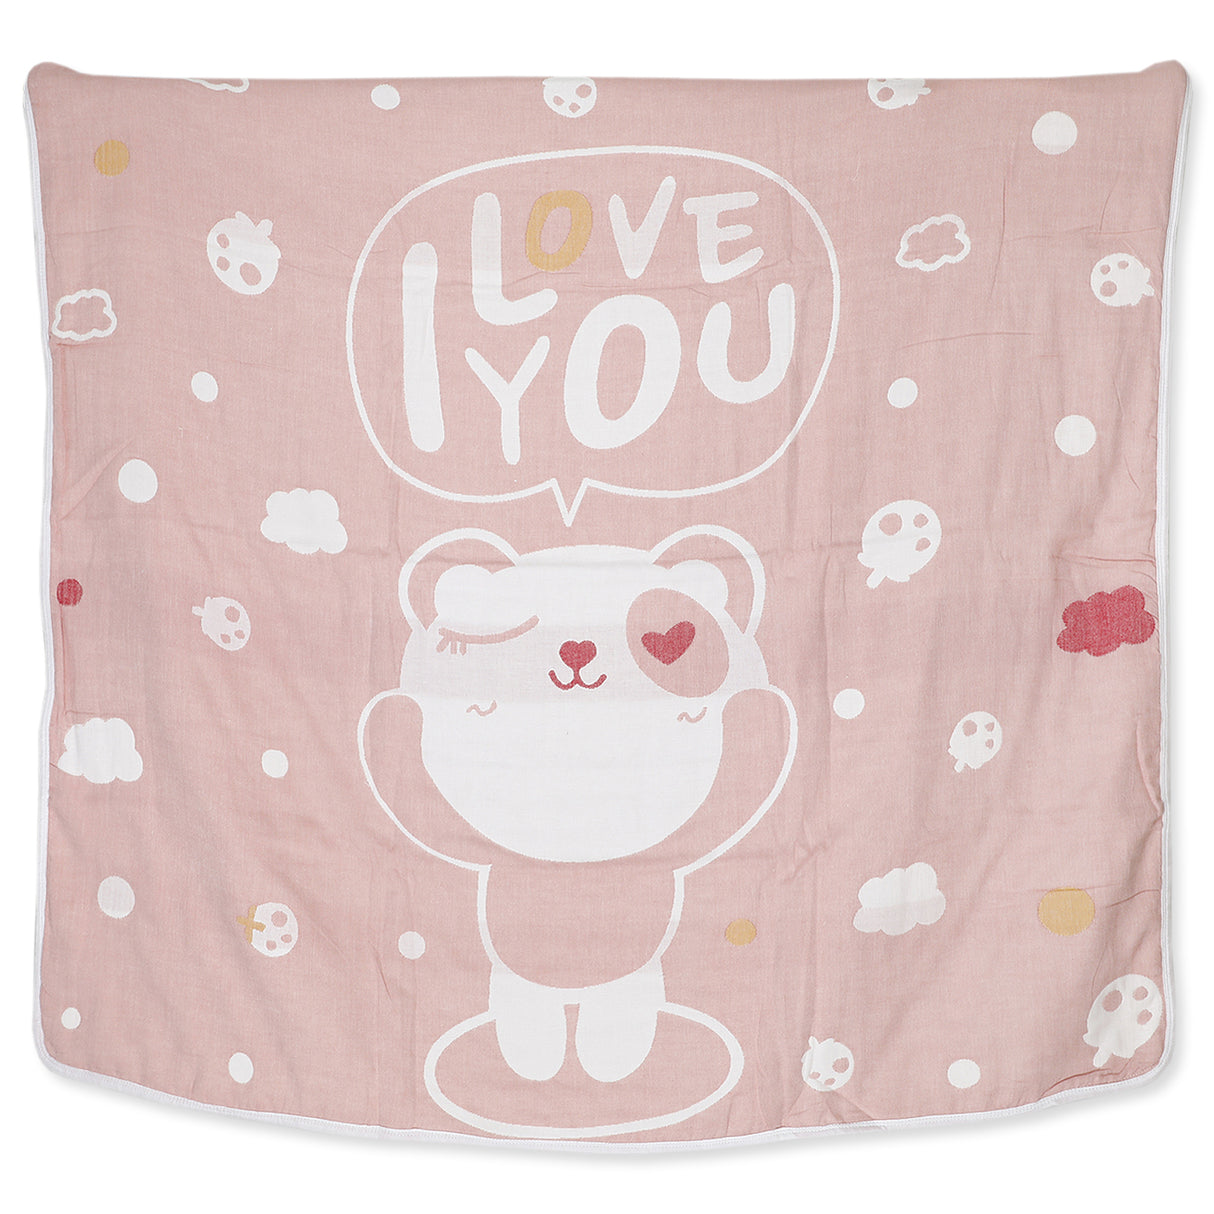 Adorable Wrapped In Love Theme Blanket